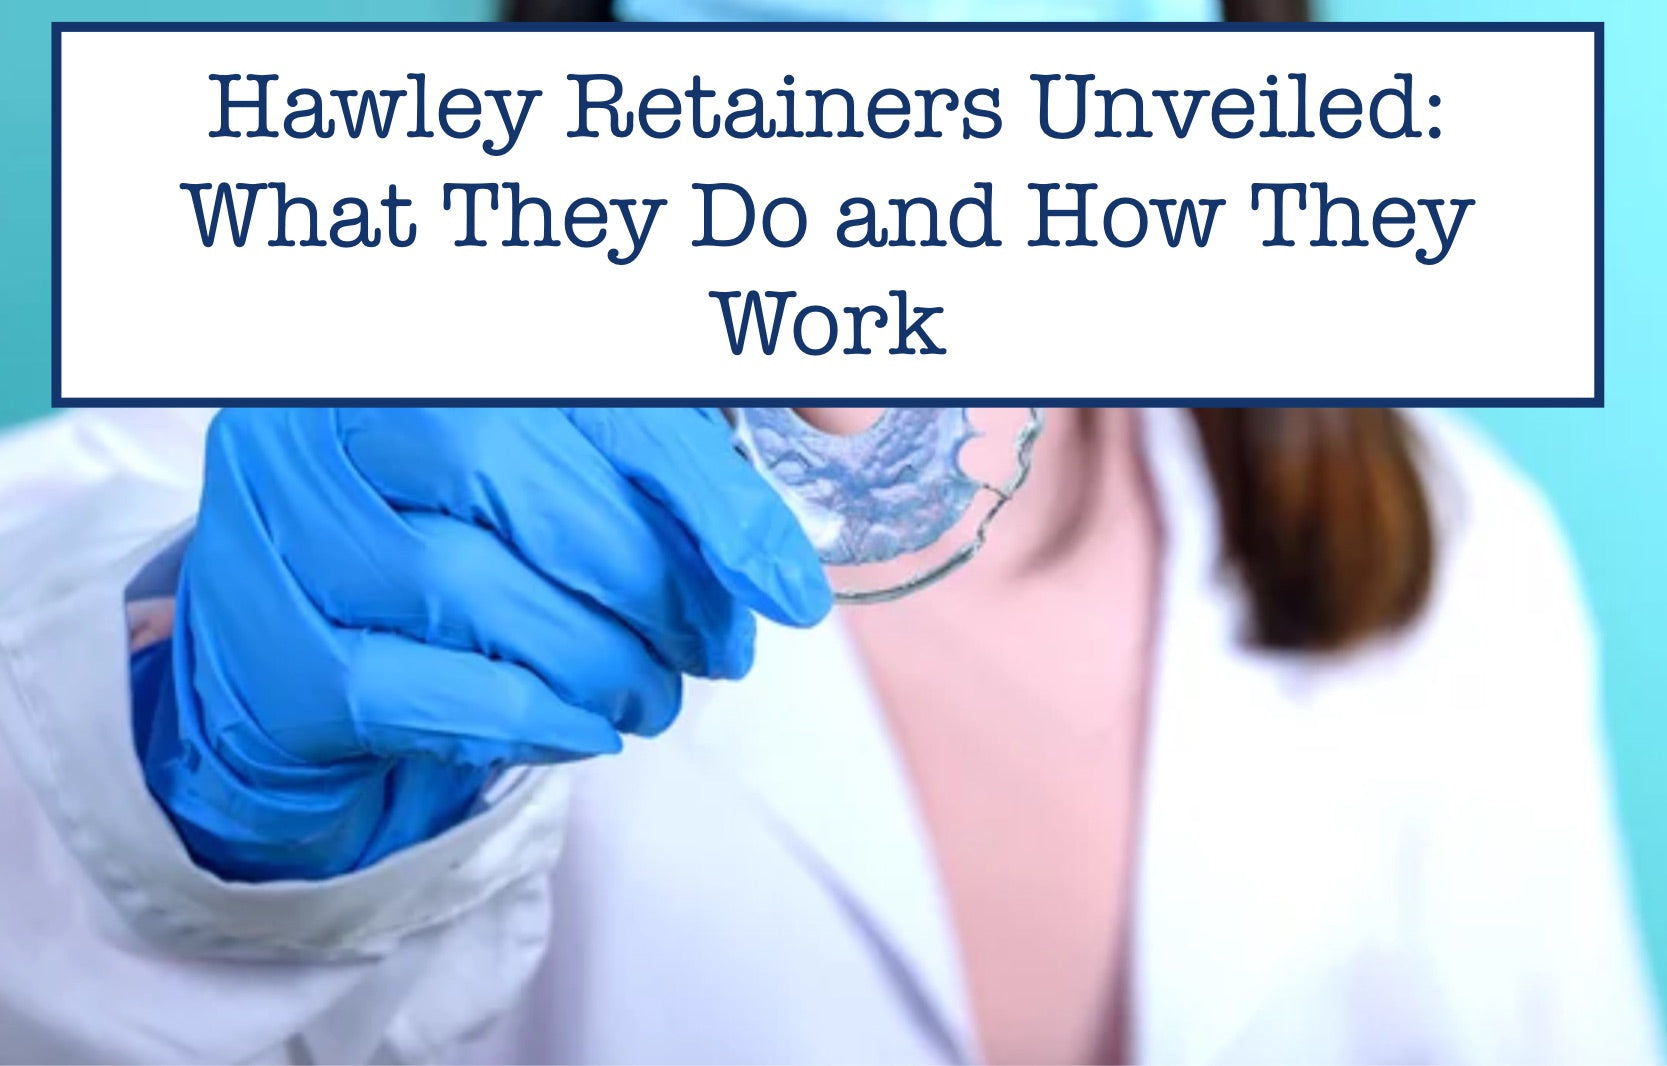 Hawley Retainers: What They Do and How They Work